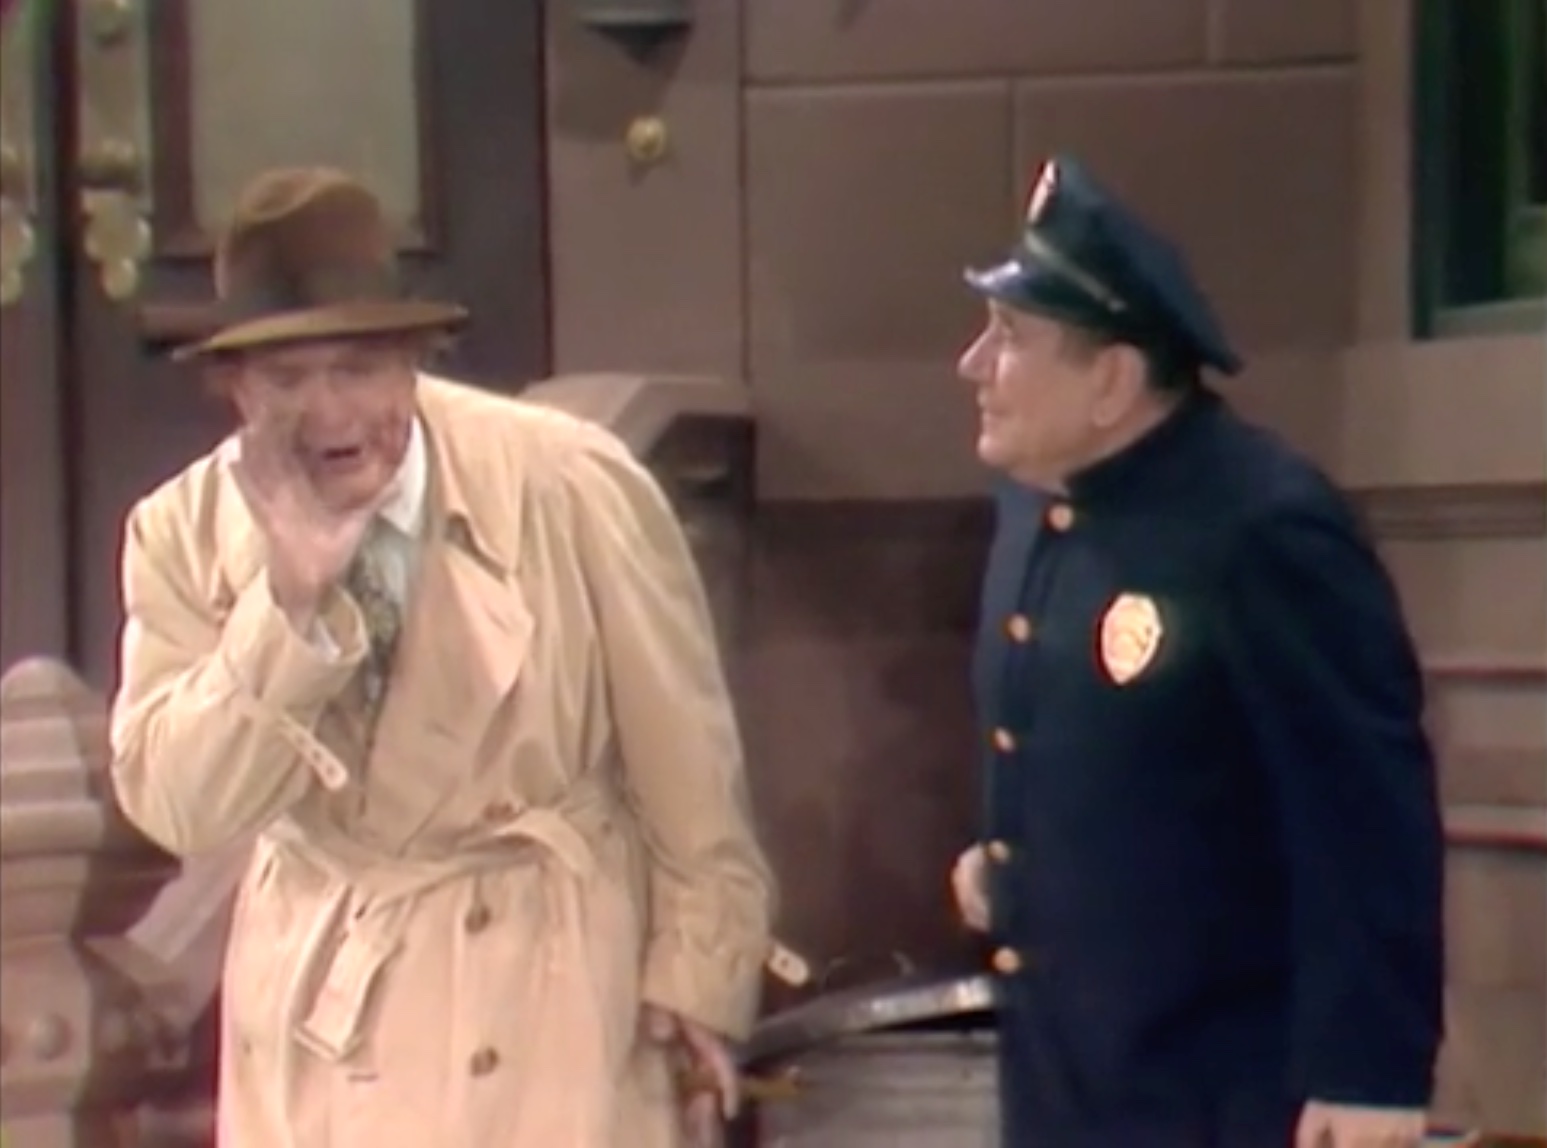 Willy Lump-Lump teaches Clancy the Cop how to tell time with garbage can lids in "The Pie-Eyed Piper"